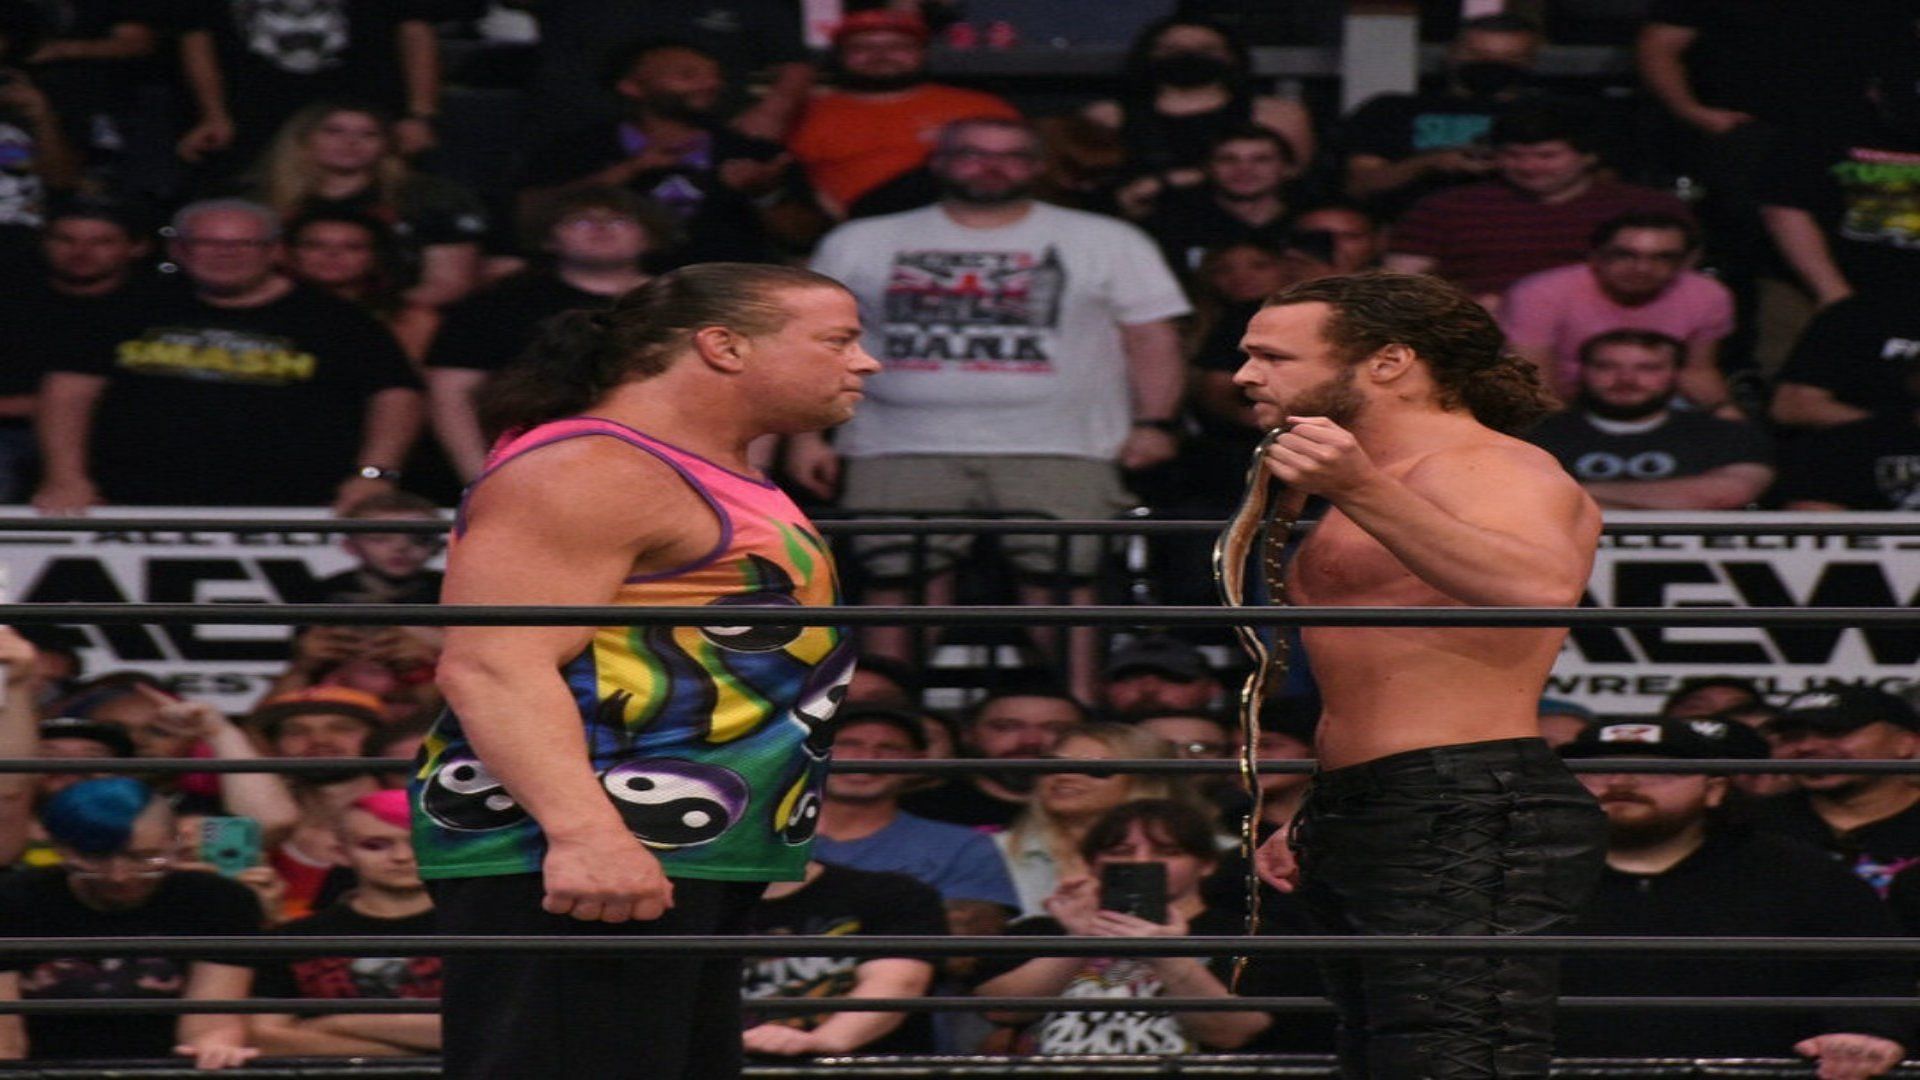 Rob Van Dam and Jack Perry on AEW TV